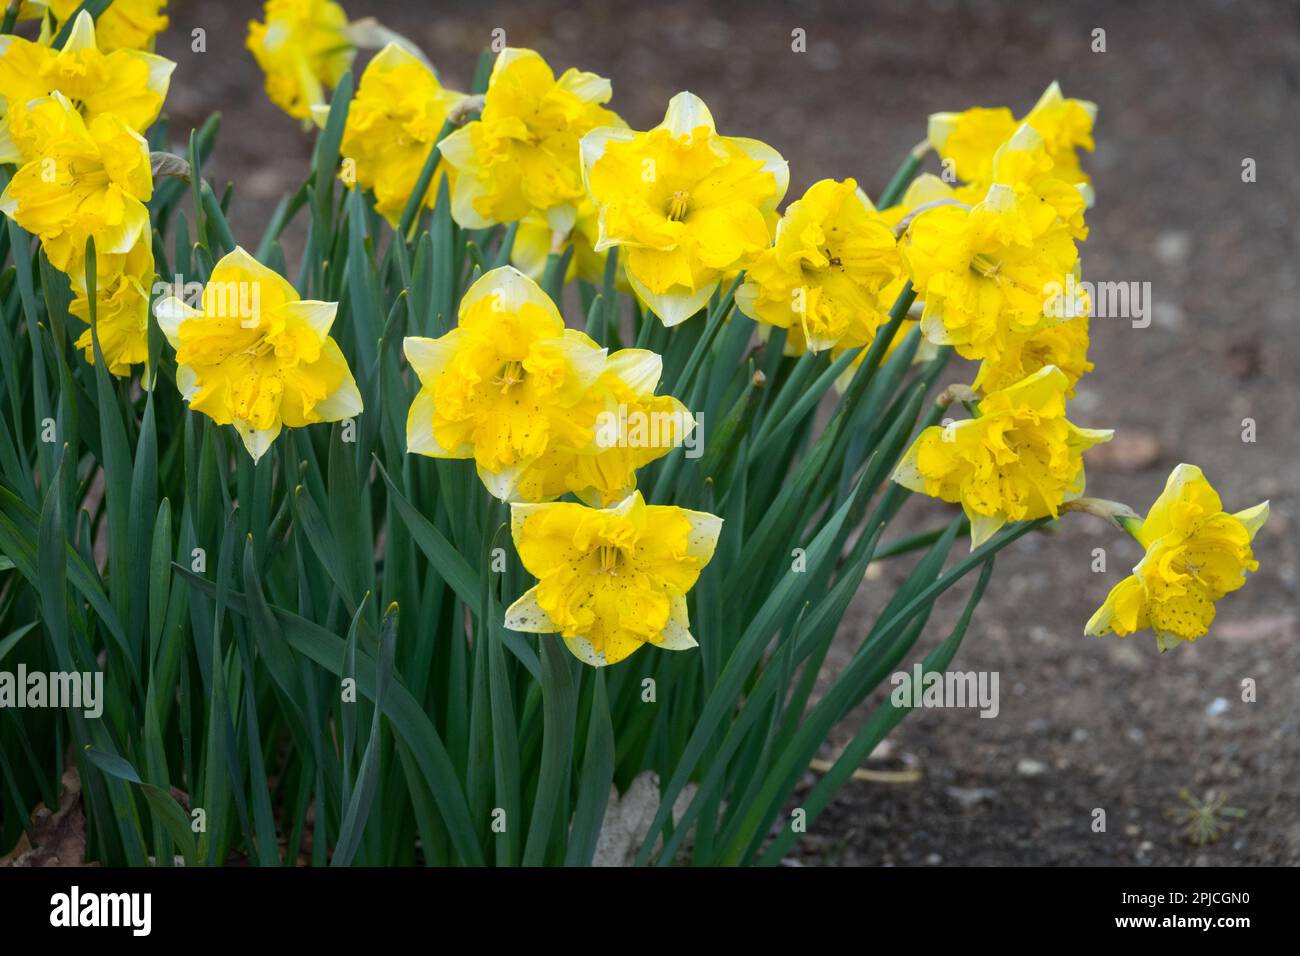 Narcissus Daffodils 'Chanterelle', Flowers Stock Photo